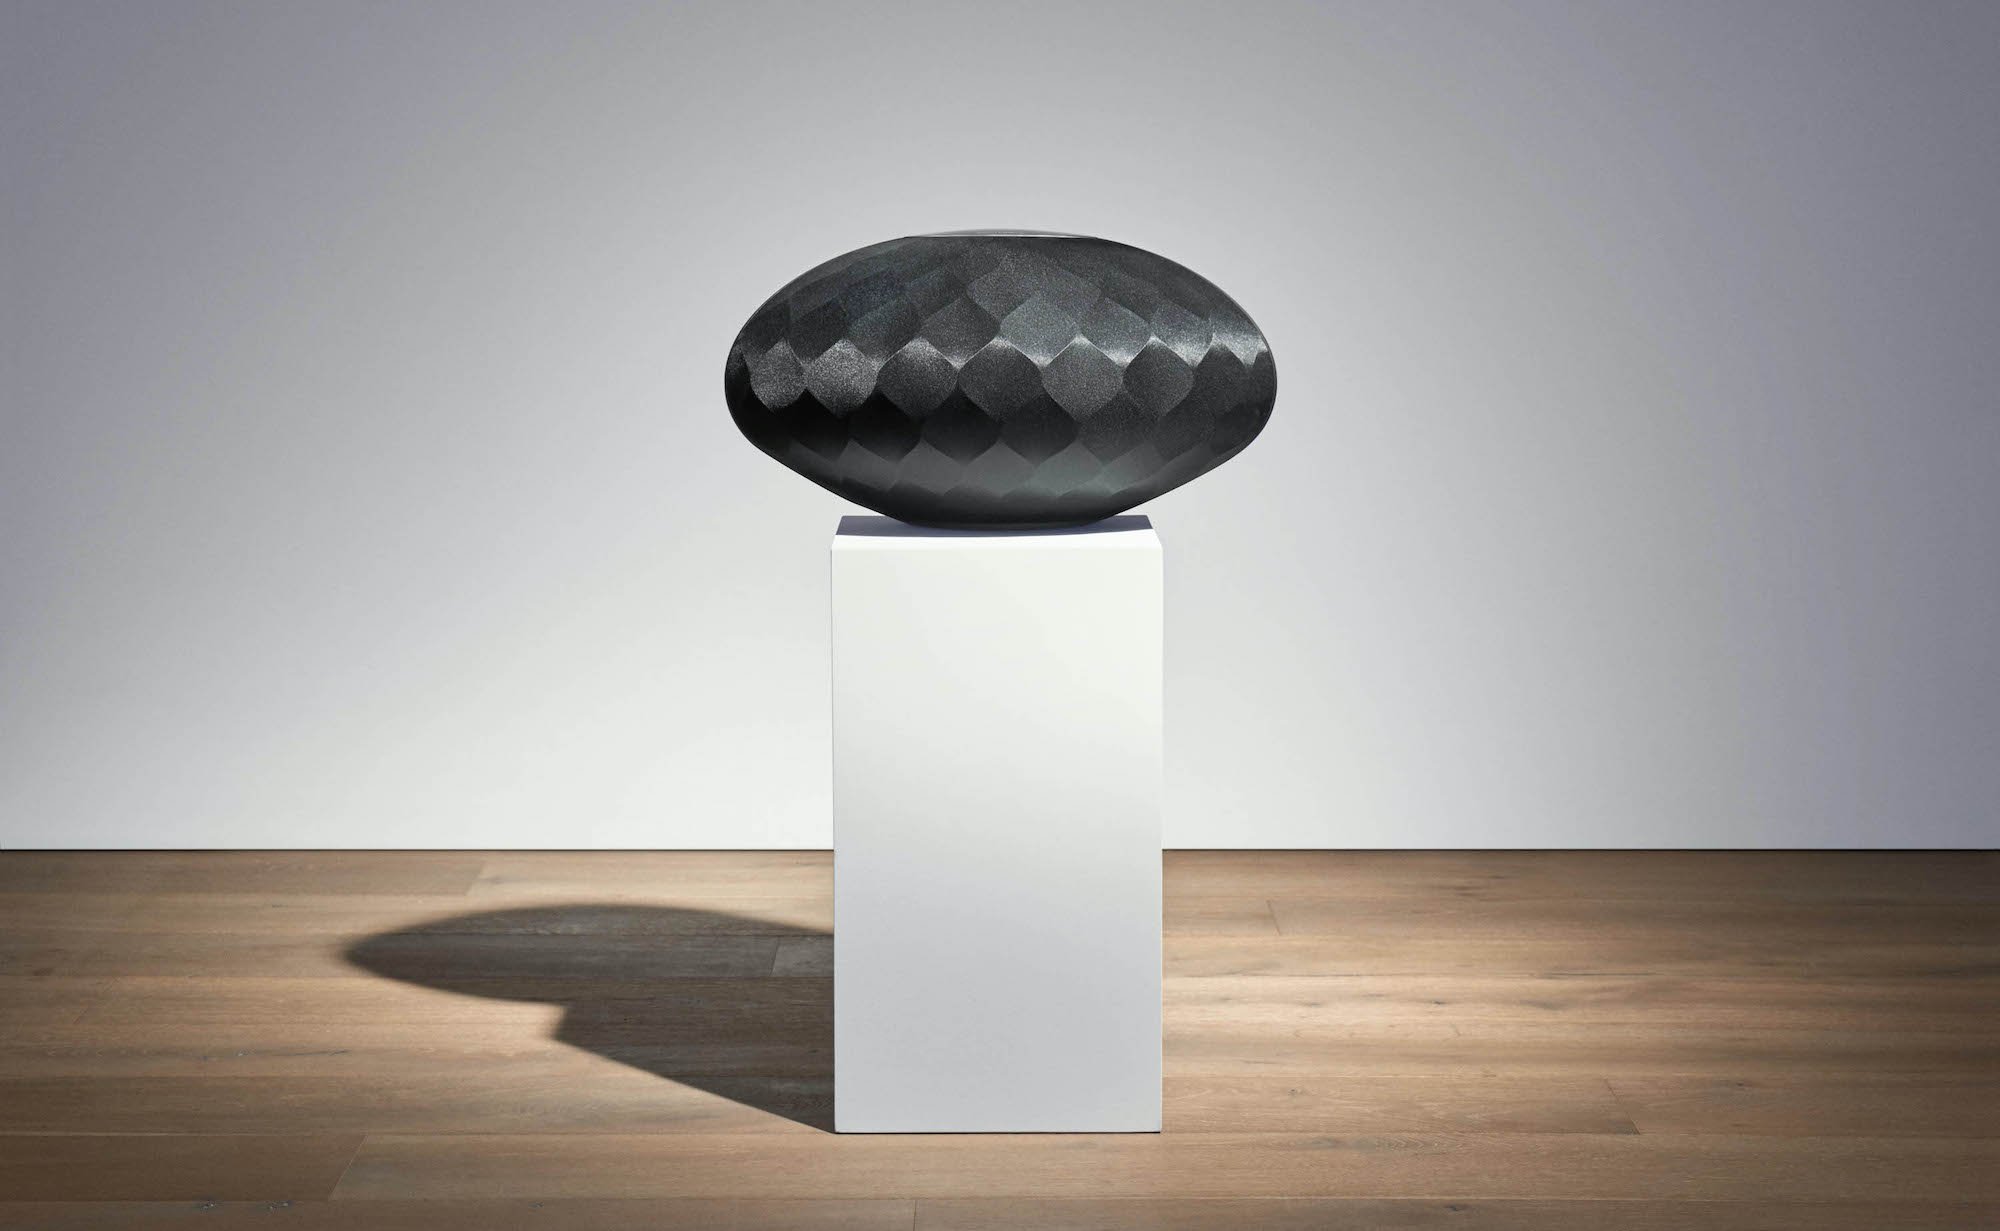 Bowers & Wilkins Formation Wedge Angled Speaker creates room-filling sound